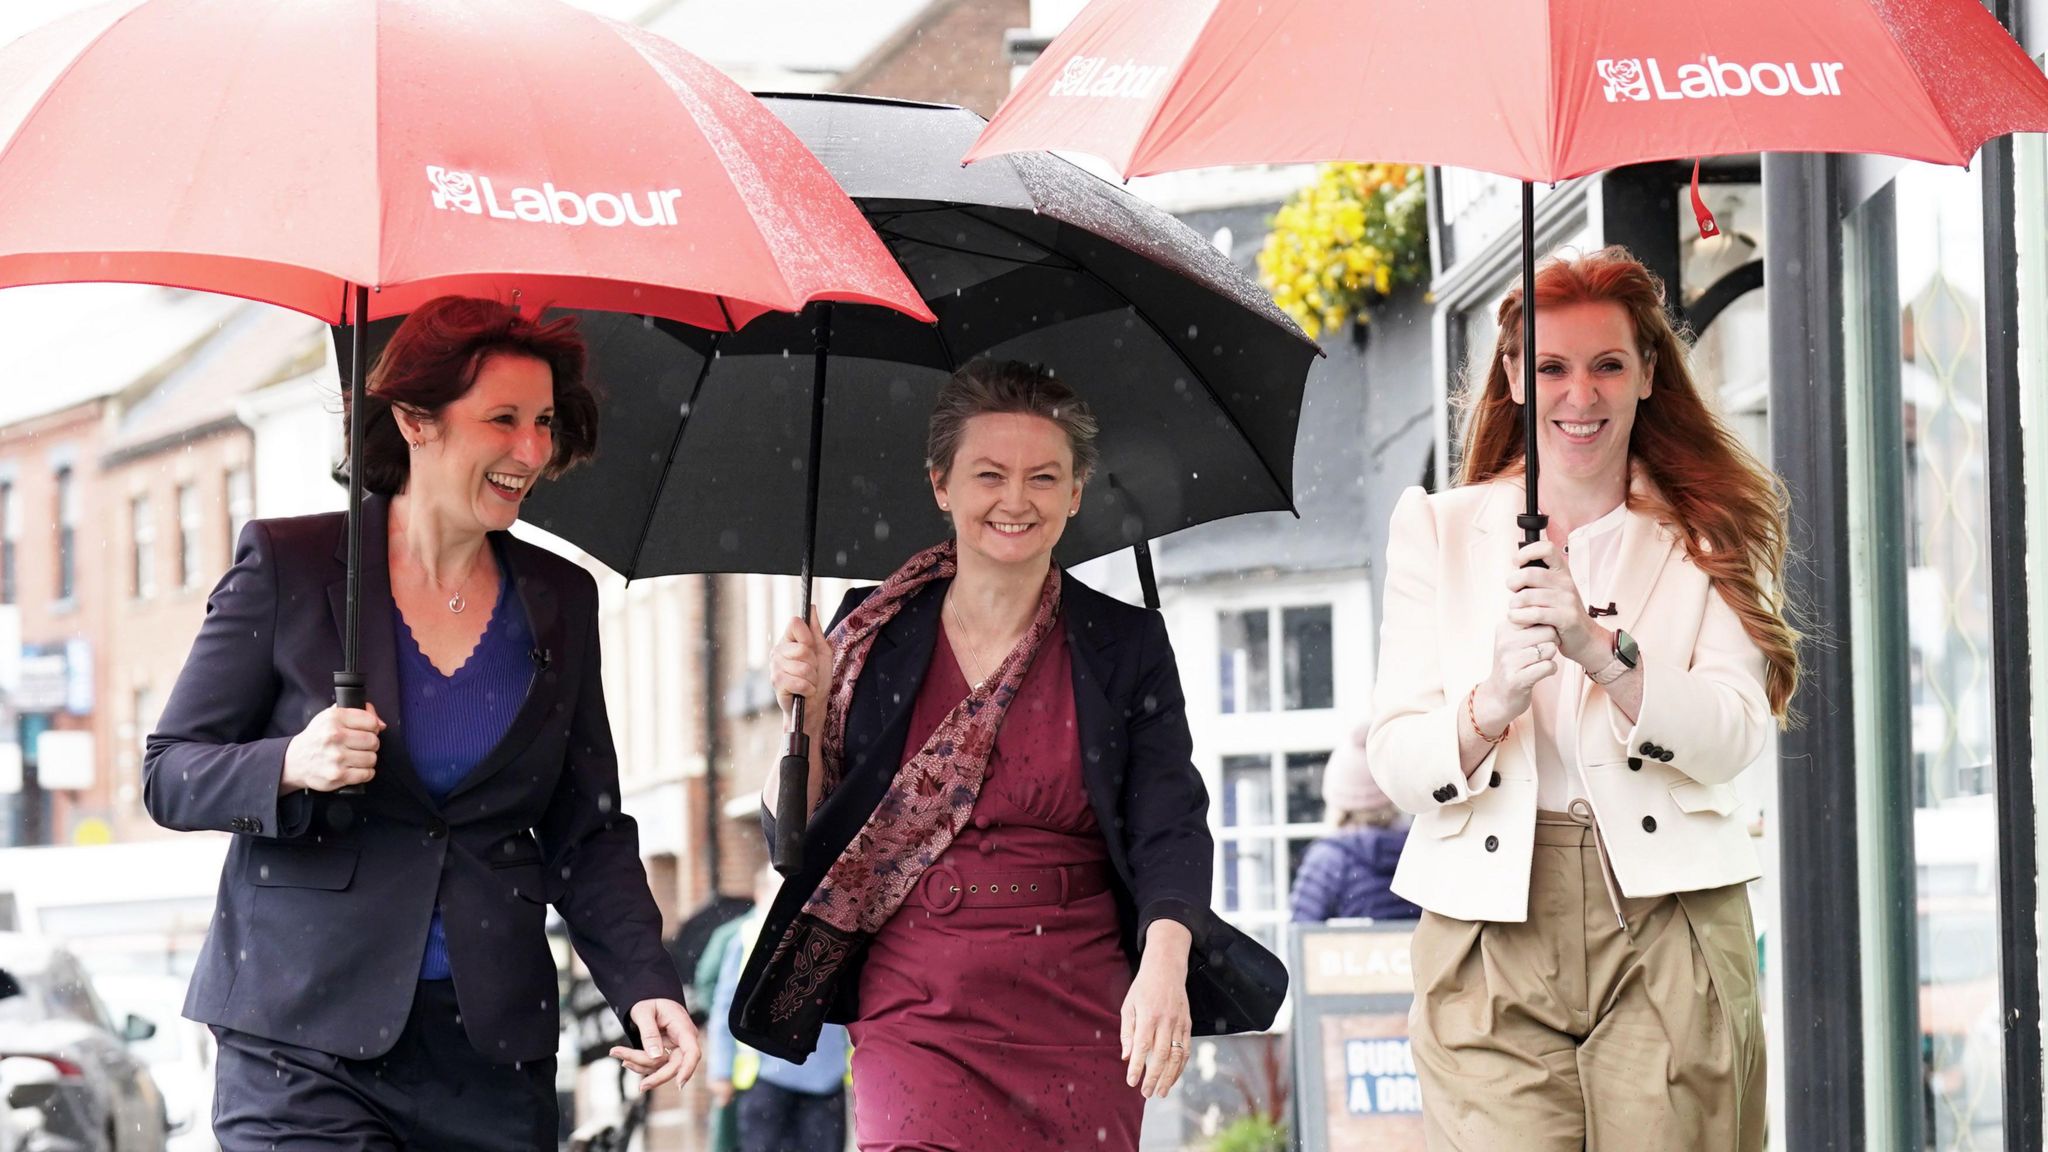 From left to right, Rachel Reeves, Yvette Cooper and Angela Rayner shelter under umbrellas in the Yarm rain